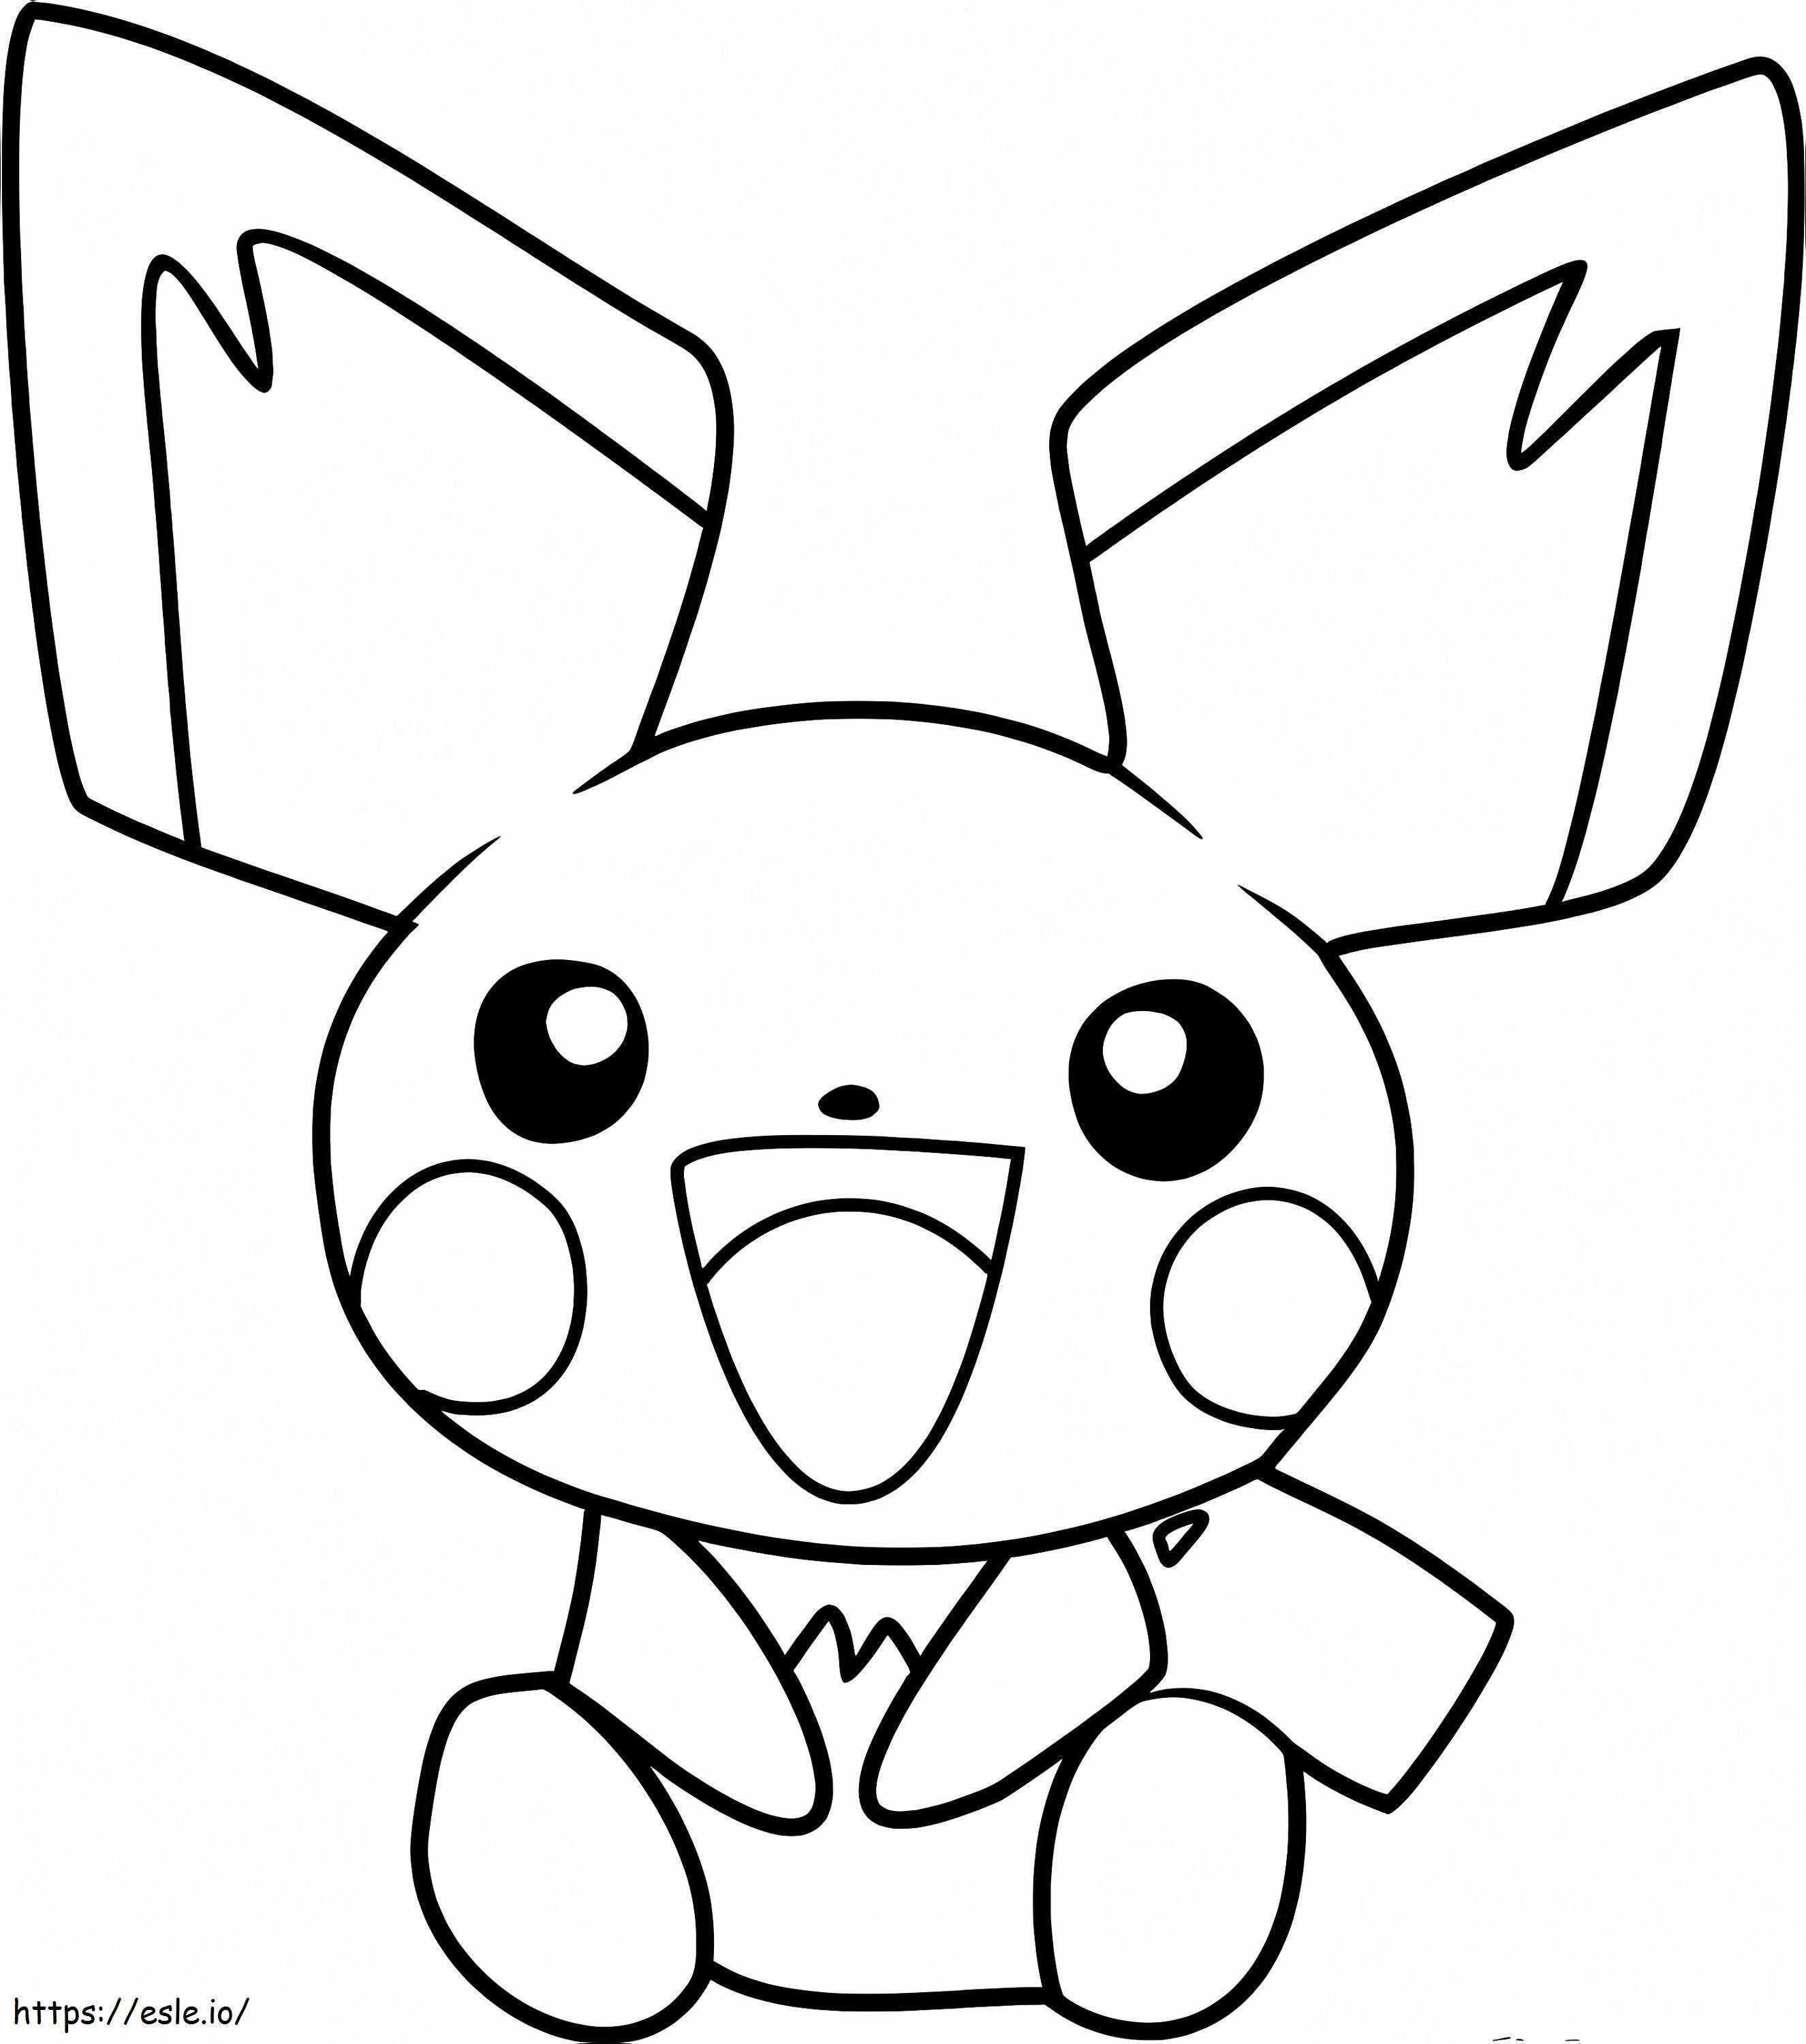 Pichu Sitting coloring page